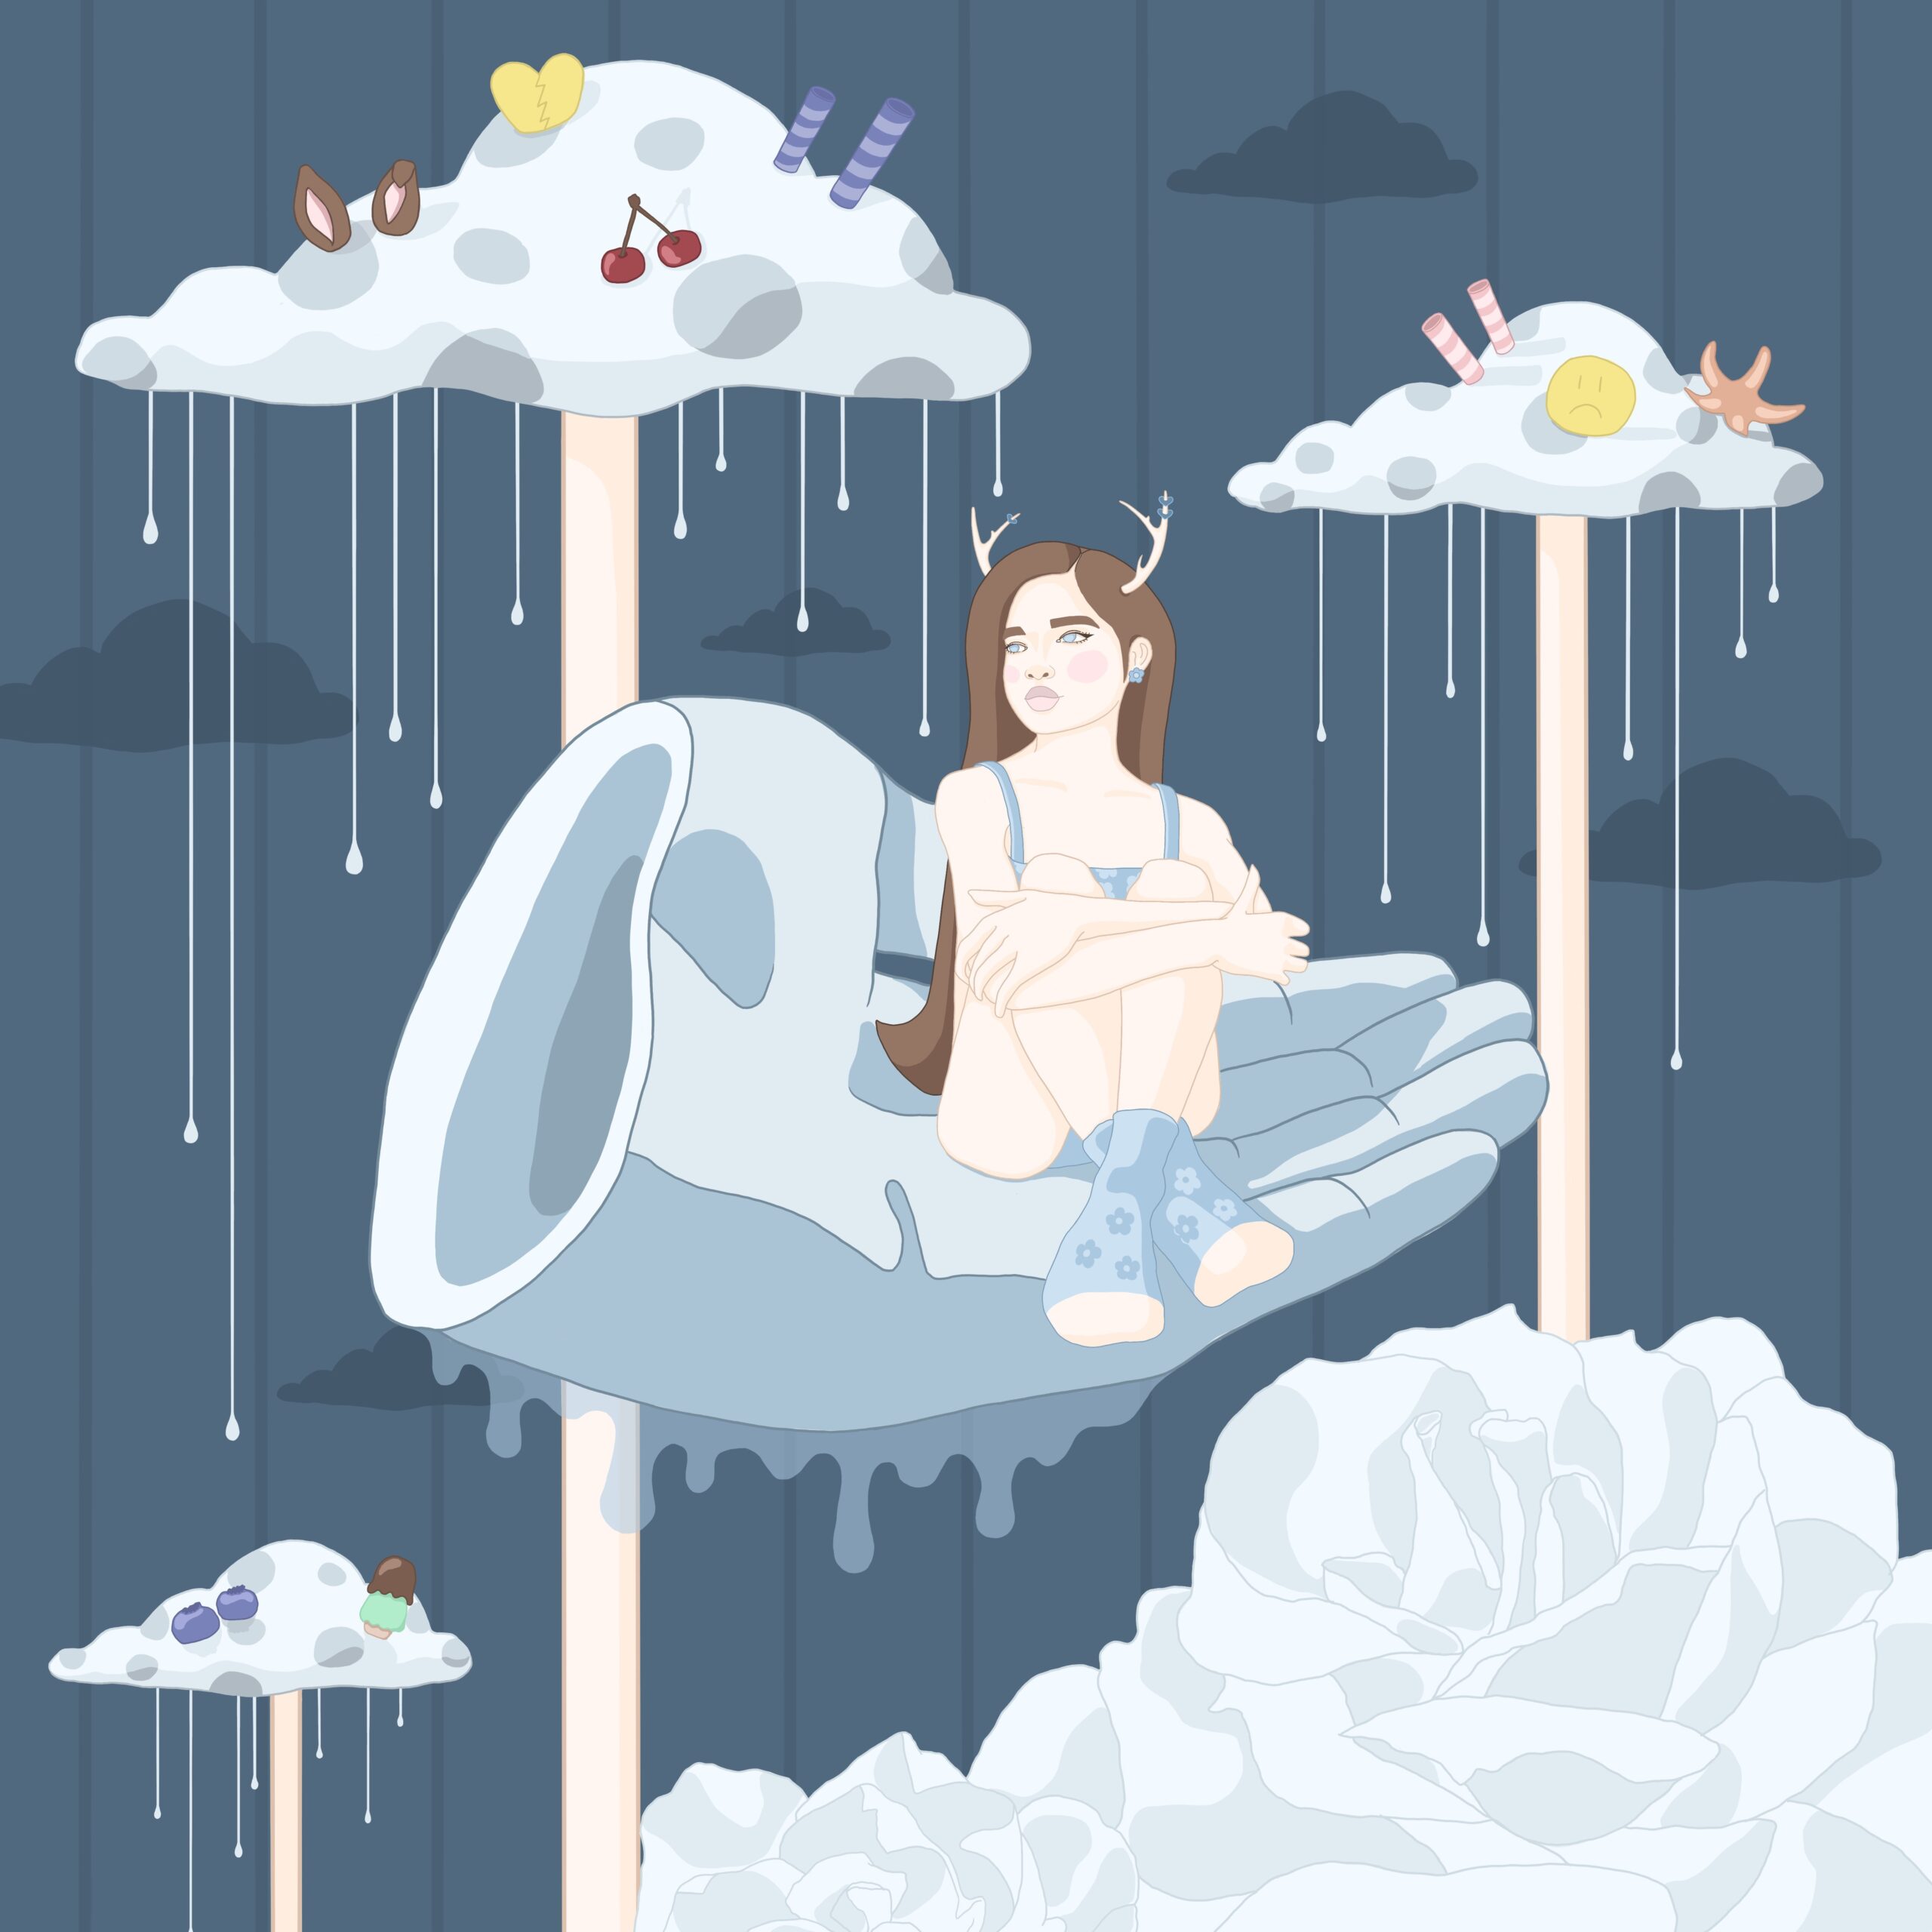 Digital fantasy illustration of a girl sitting in a large floating hand with mushroom clouds in the background and flowers in the foreground. In a blue and orange/yellow color scheme